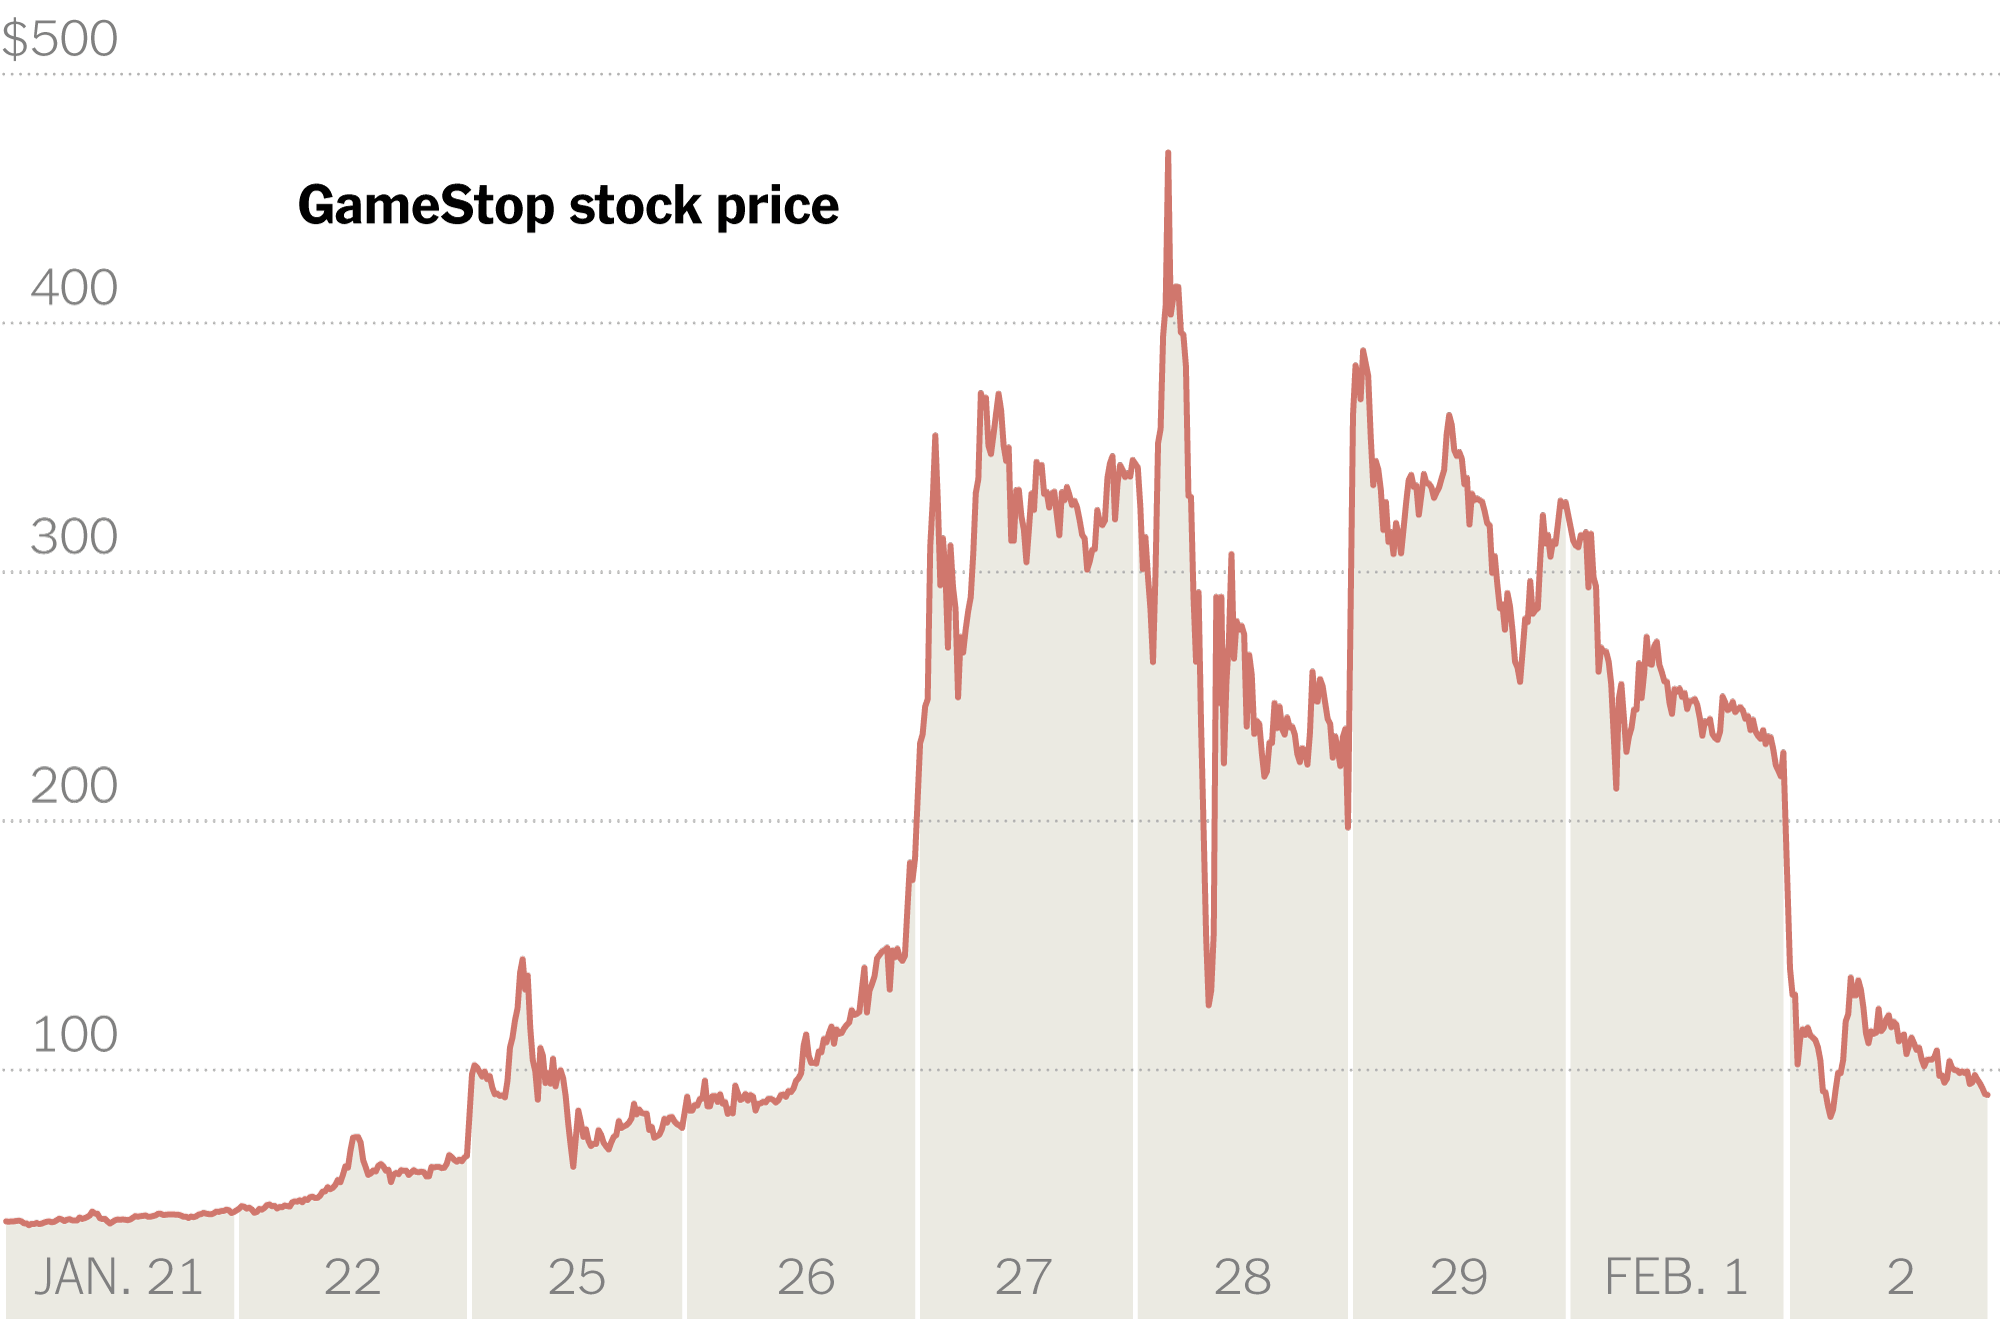 The Revival Of GameStop GME Stock Shows The Power Of The Retail 